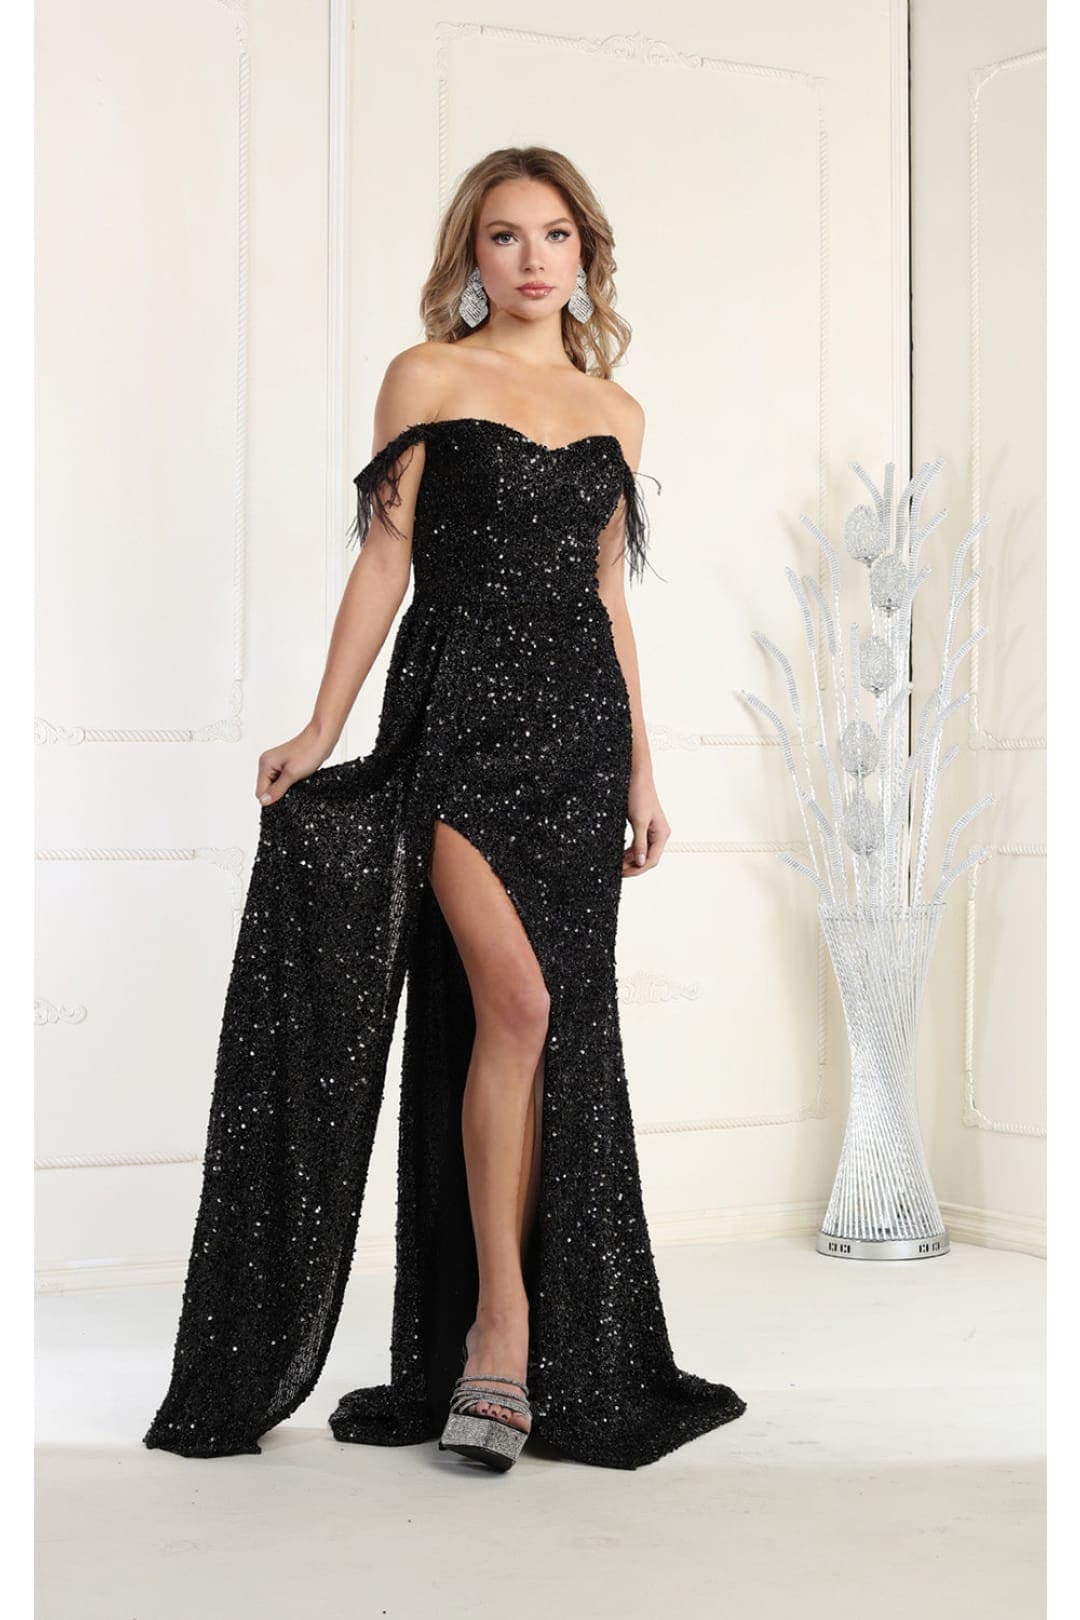 Royal Queen RQ7988 Off Shoulder Feathers Prom Dress - Dress